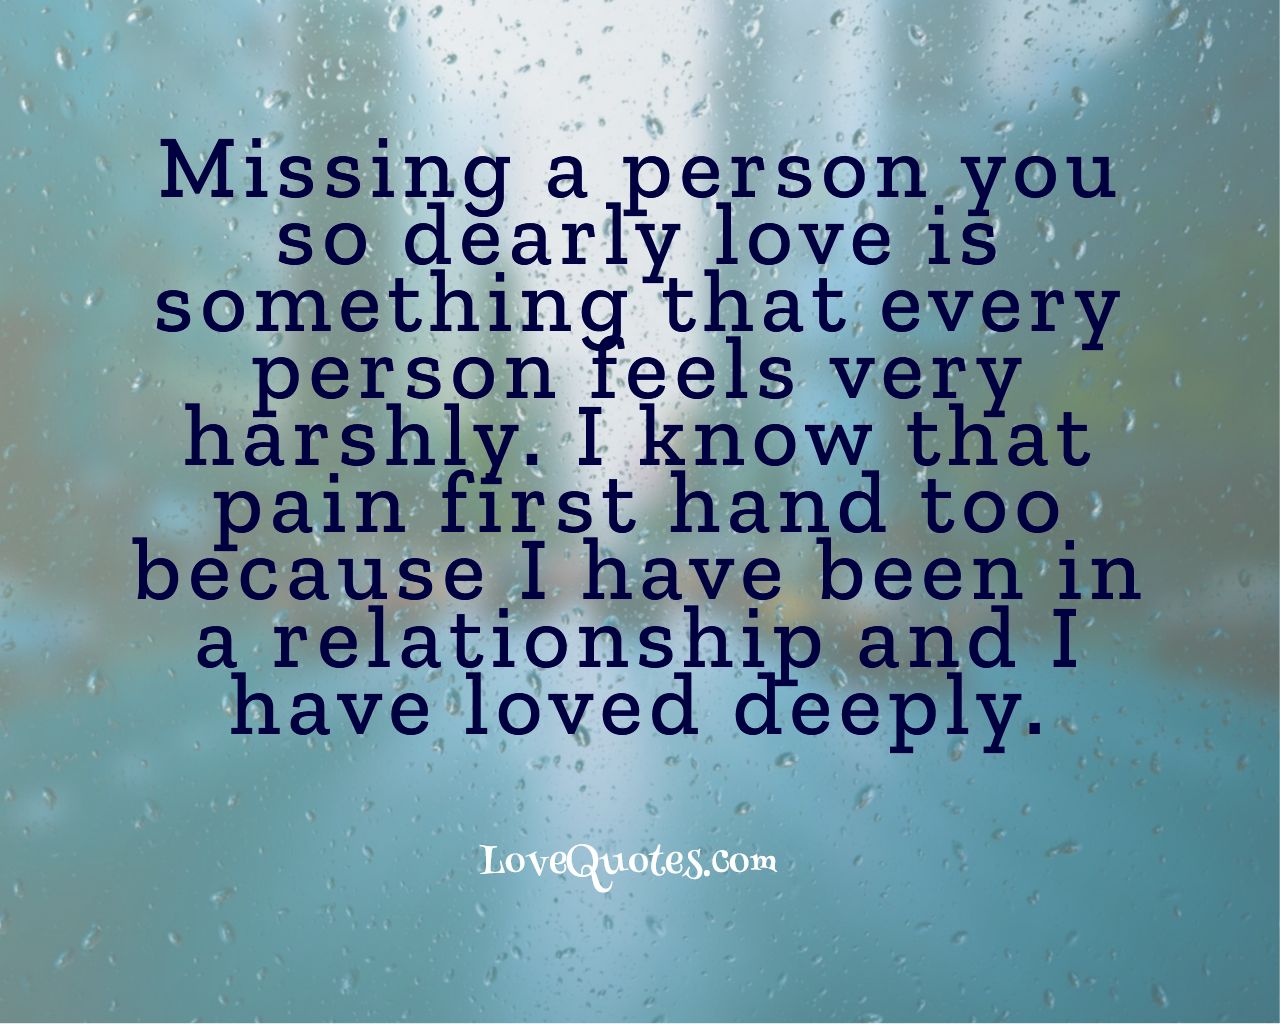 Missing A Person You Dearly Love